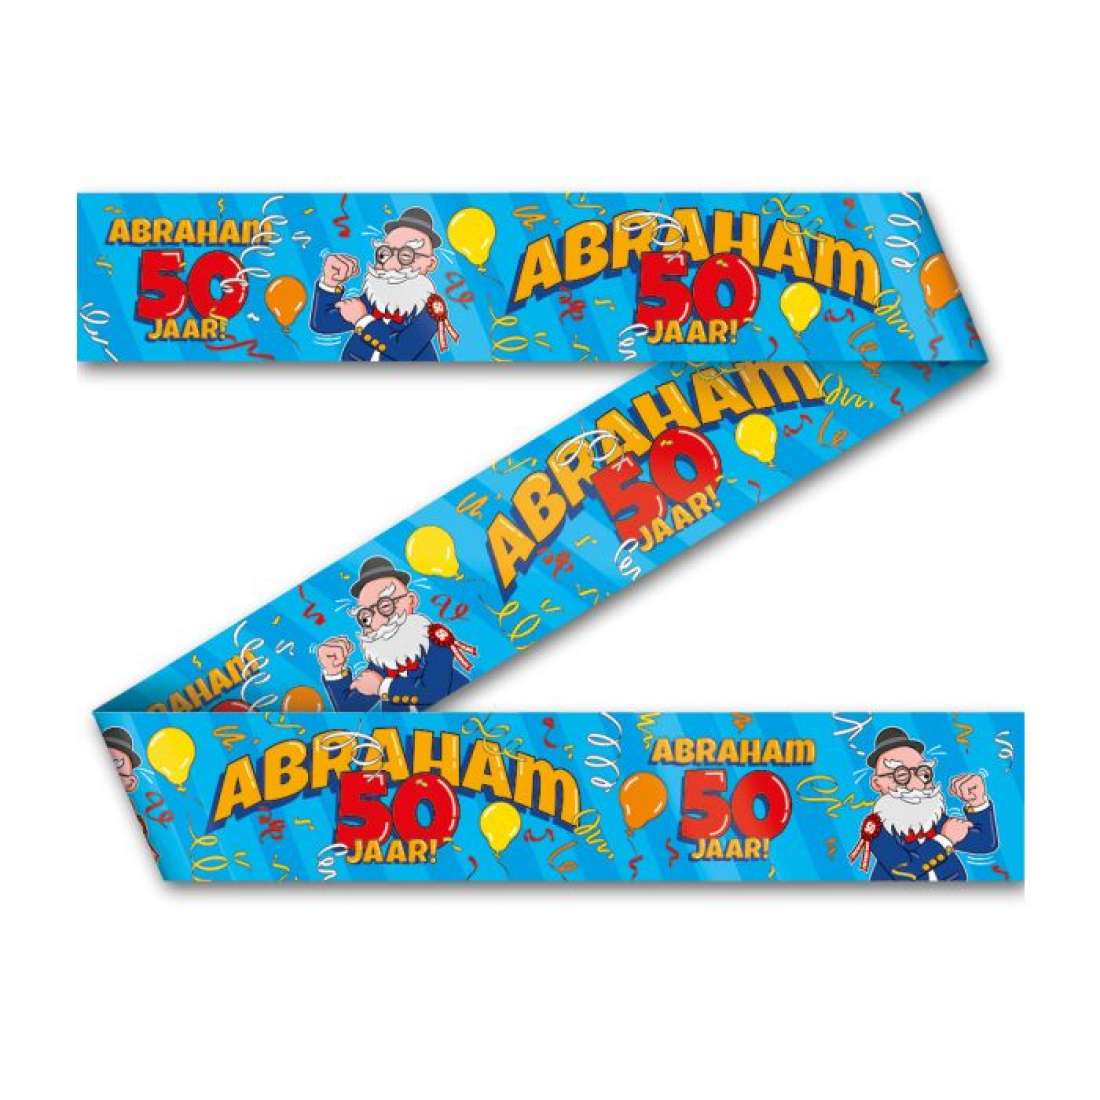 Abraham Party tape